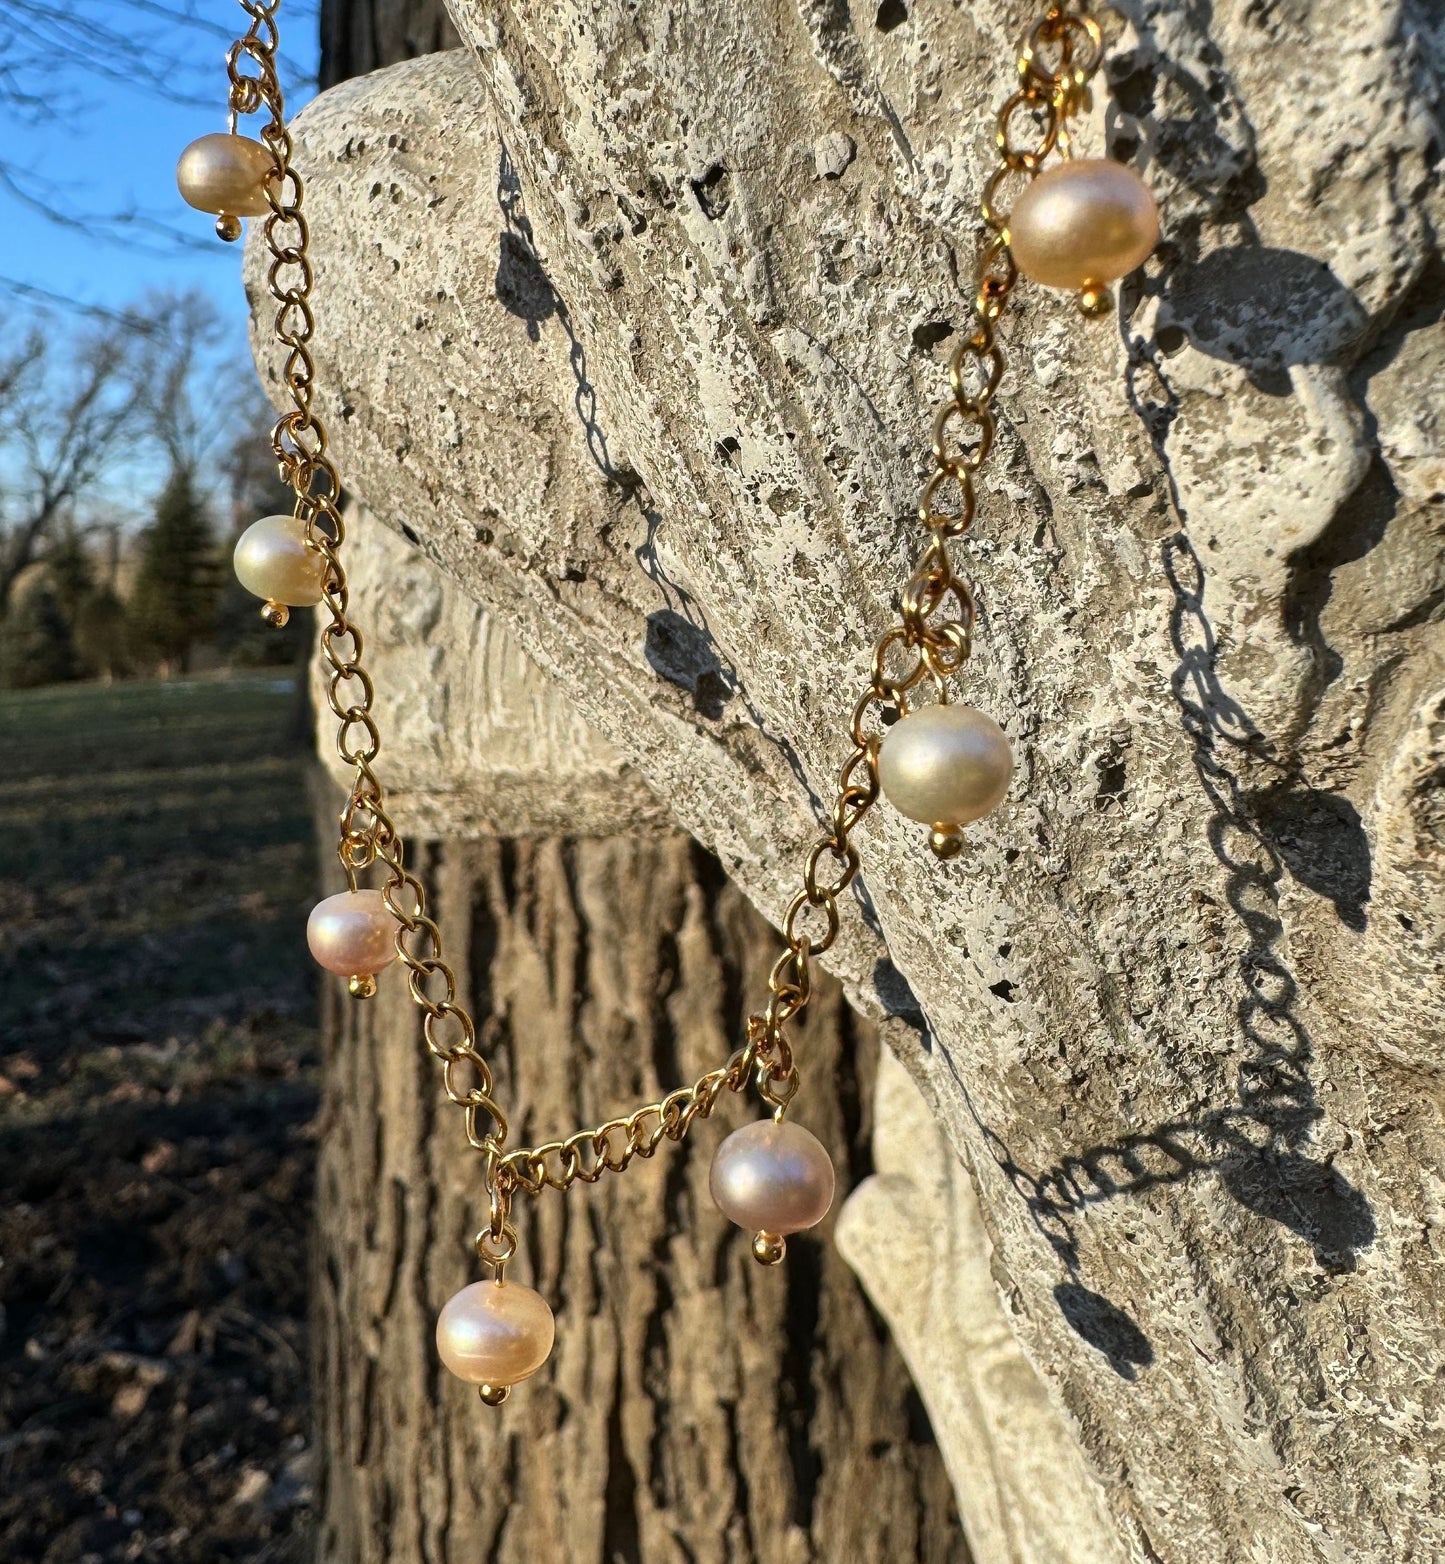 Ivory and Pink Pearls Dangling on Gold Chain Necklace - Real Freshwater Pearls